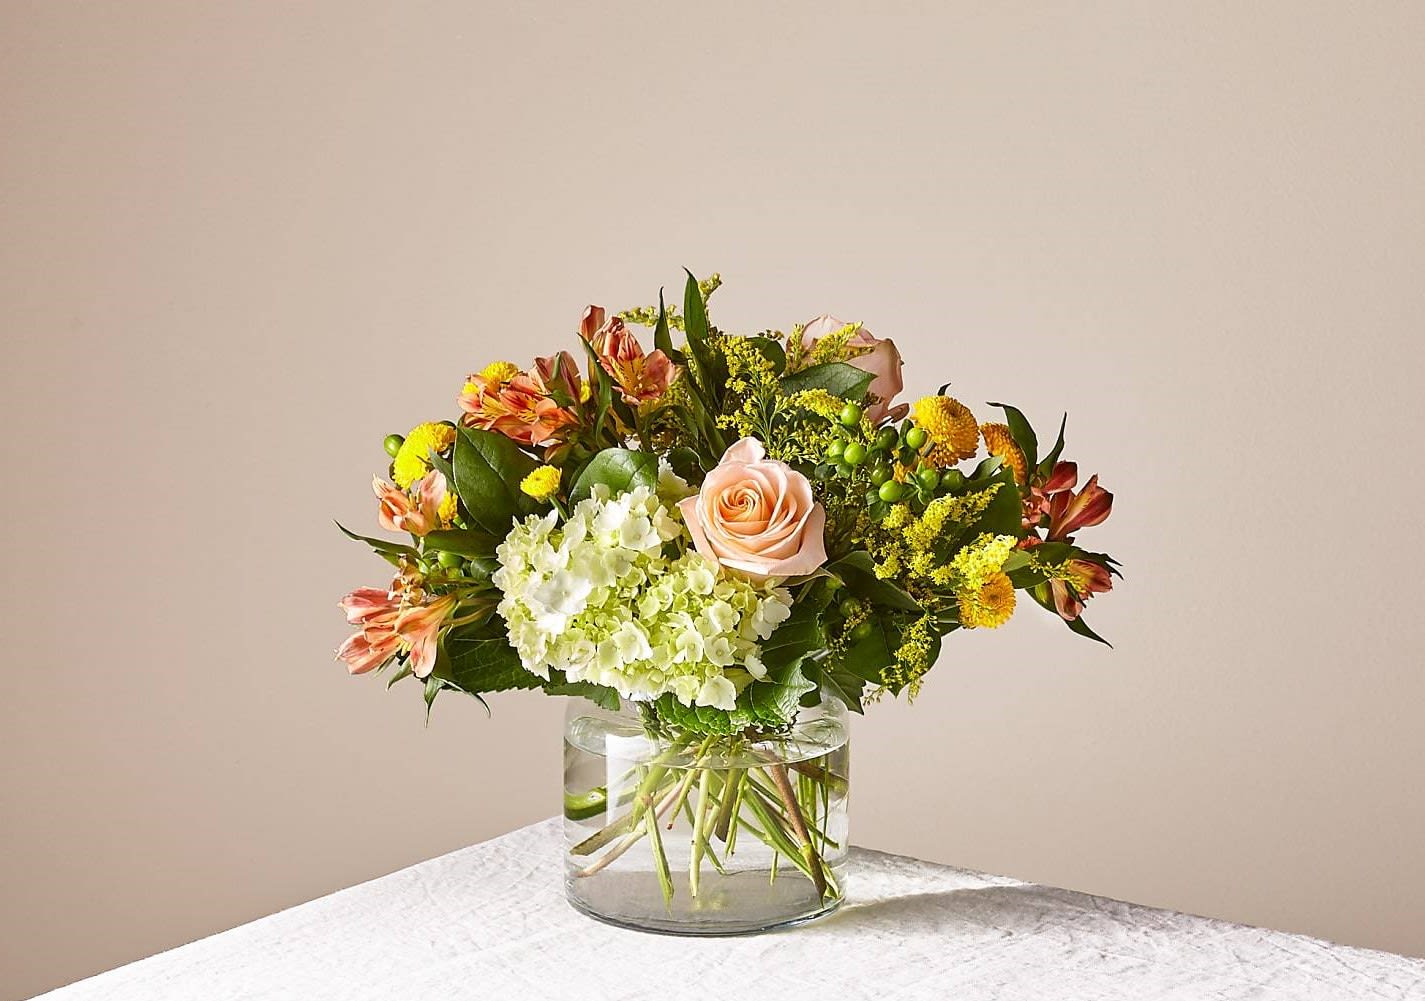 FTD Life's A Peach Bouquet - **MAIN PHOTO SHOWS DELUX OPTION**  This radiant bouquet is designed with a dreamy mix of peach, yellow, and light green blooms to create the perfect impression. Whether it's sent as a pick–me–up, a celebration, or just to make someone smile, everything is just peachy once this arrangement arrives.  Please Note: The bouquet pictured reflects our original design for this product. While we always try to follow the color palette, we may replace stems to deliver the freshest bouquet possible, and we may sometimes need to use a different vase.